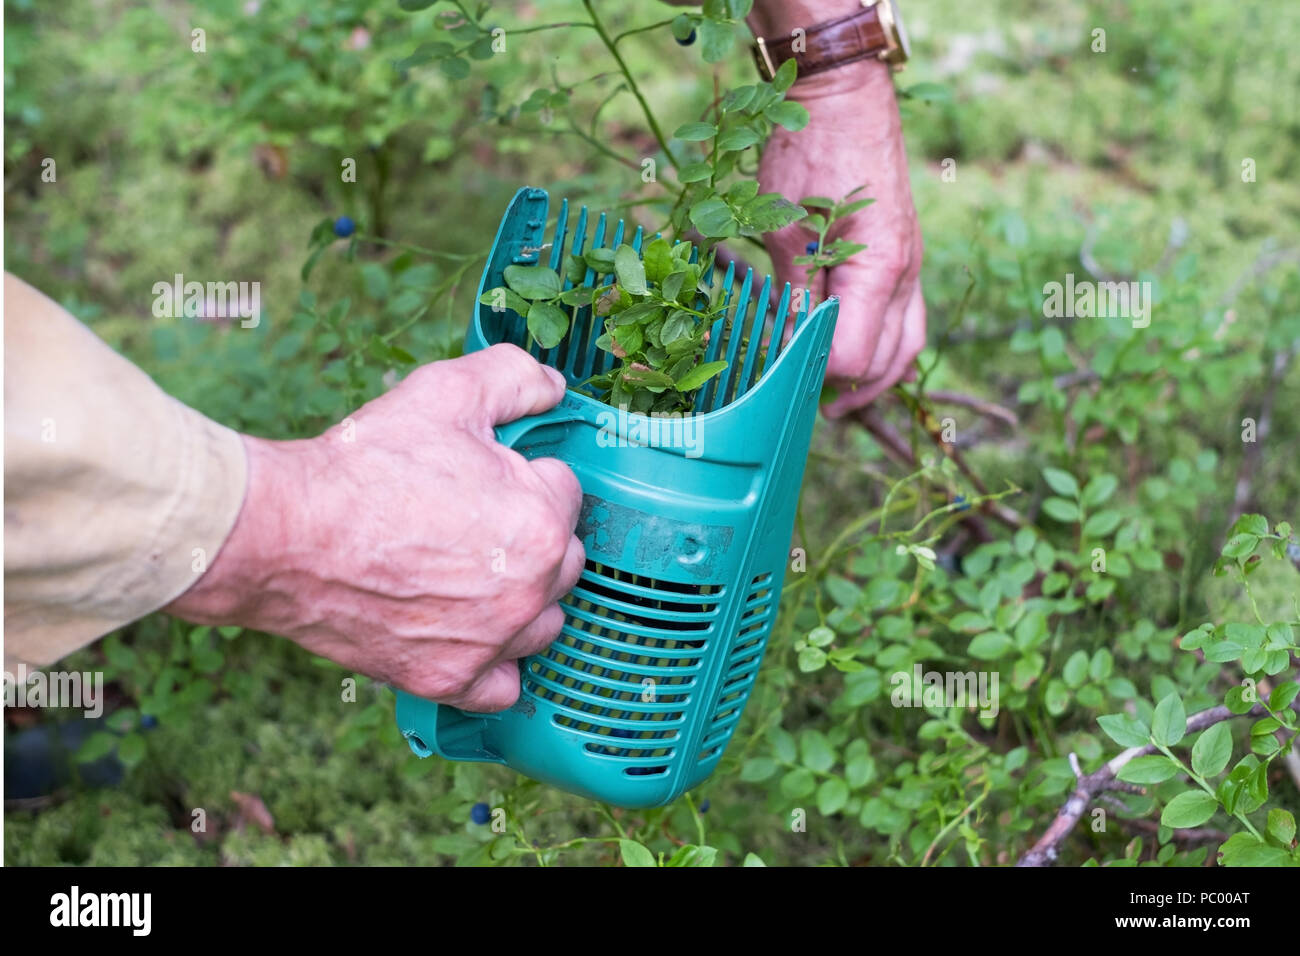 senior collecting blueberries with a harvester comb in the forest Stock Photo